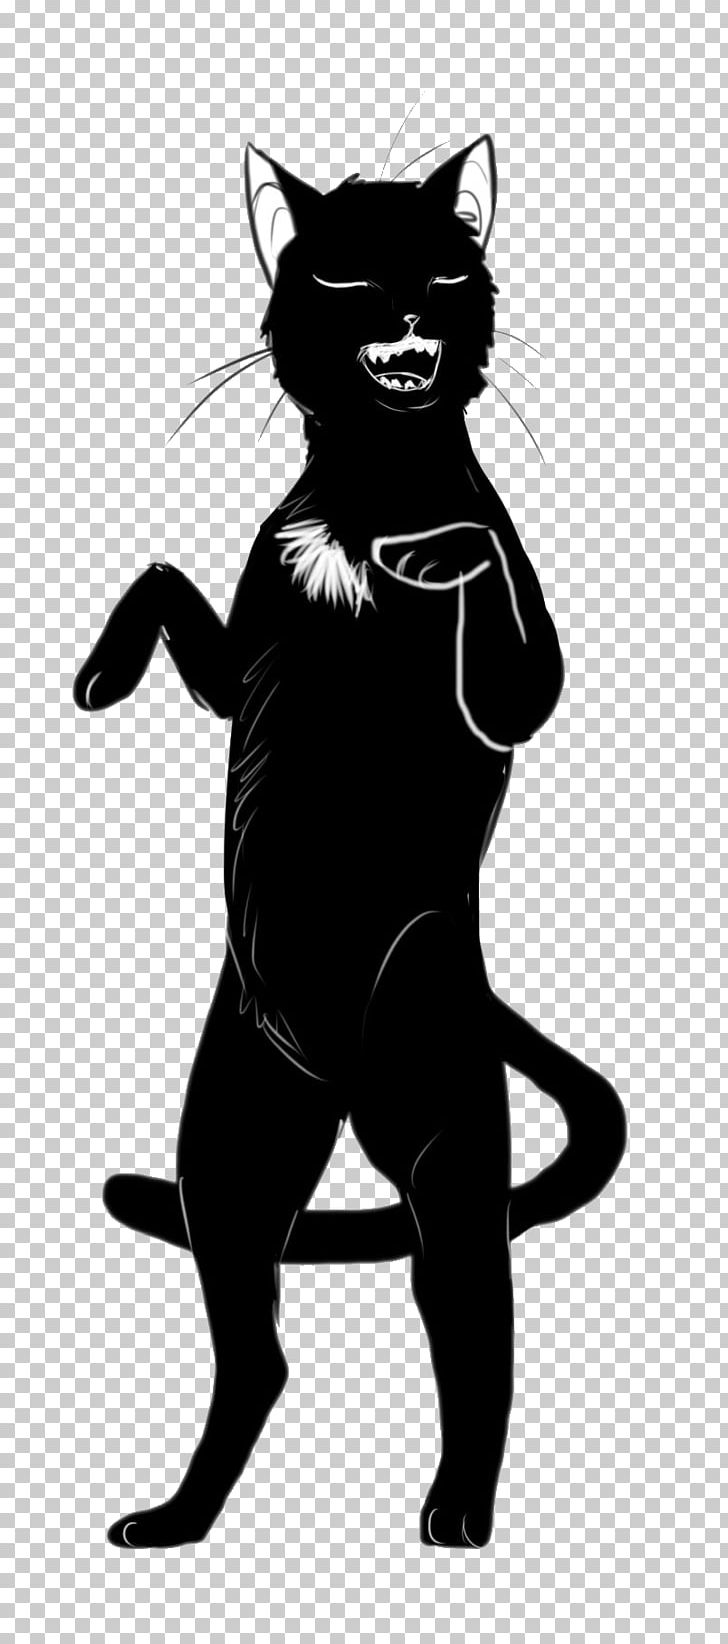 Whiskers Domestic Short-haired Cat Silhouette PNG, Clipart, Animals, Black, Black And White, Black Cat, Black M Free PNG Download